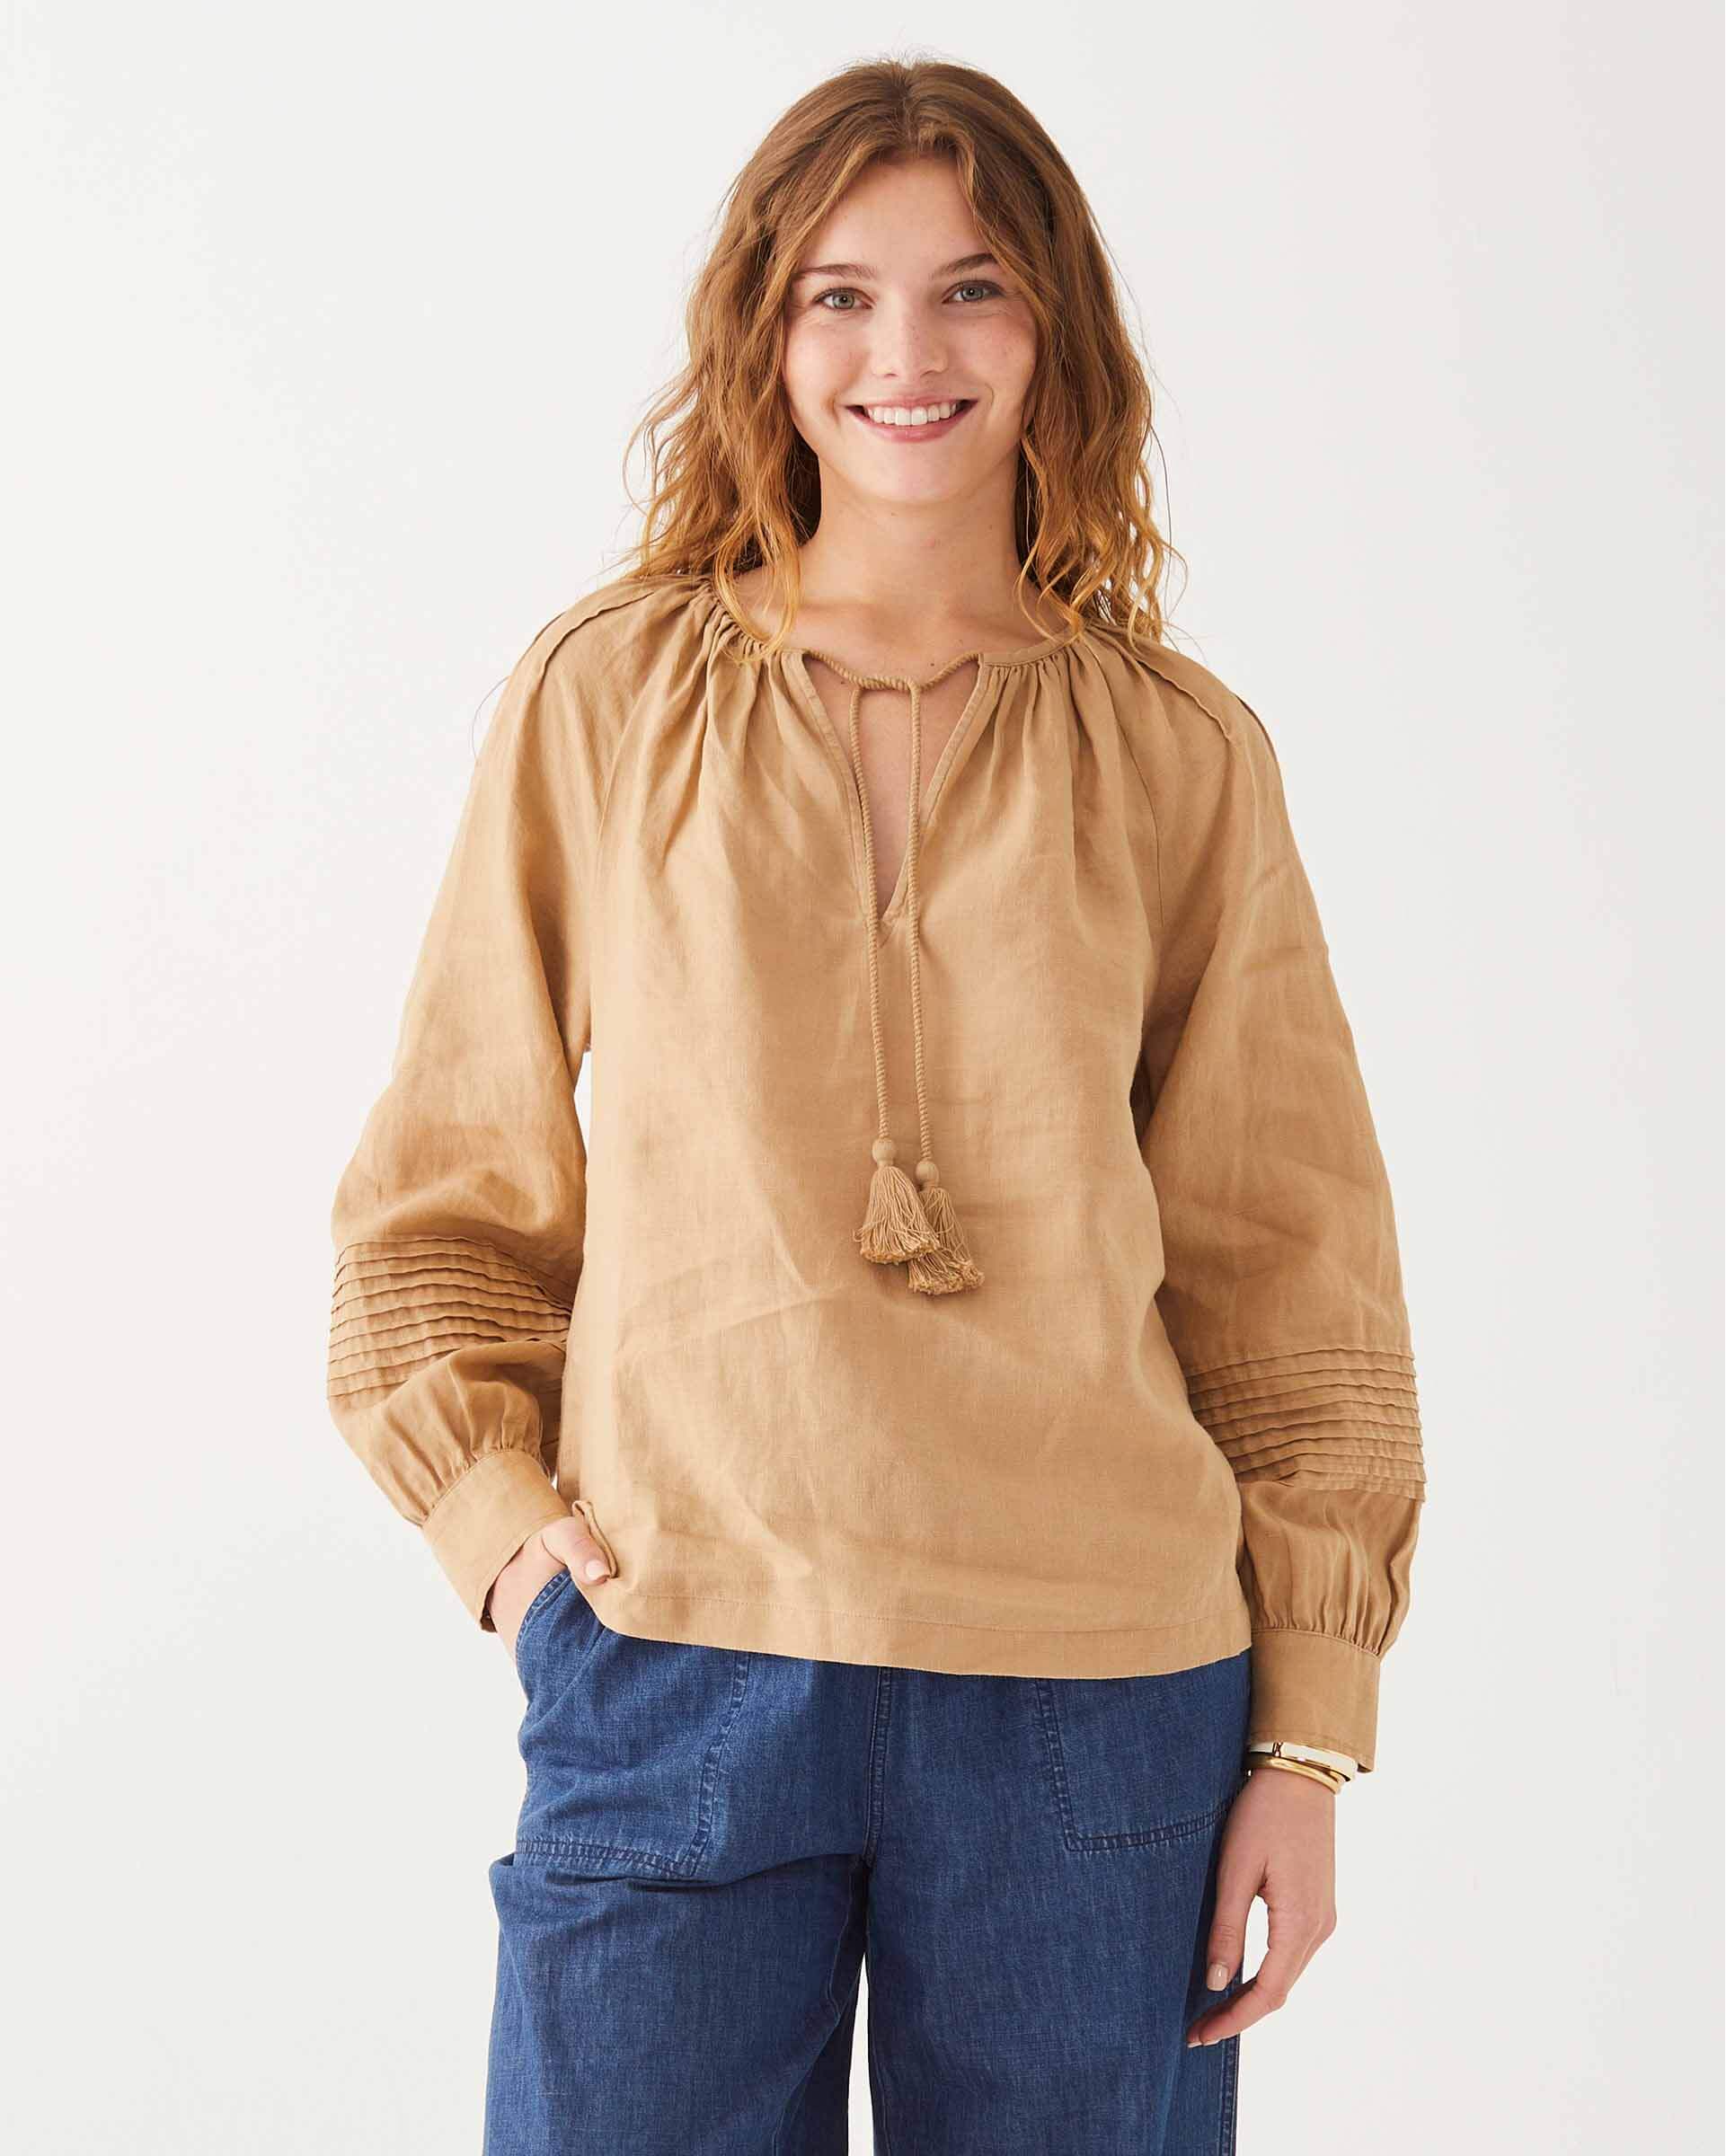 female wearing tan linen blouse with v-neck, tassels, and side slits on a white background